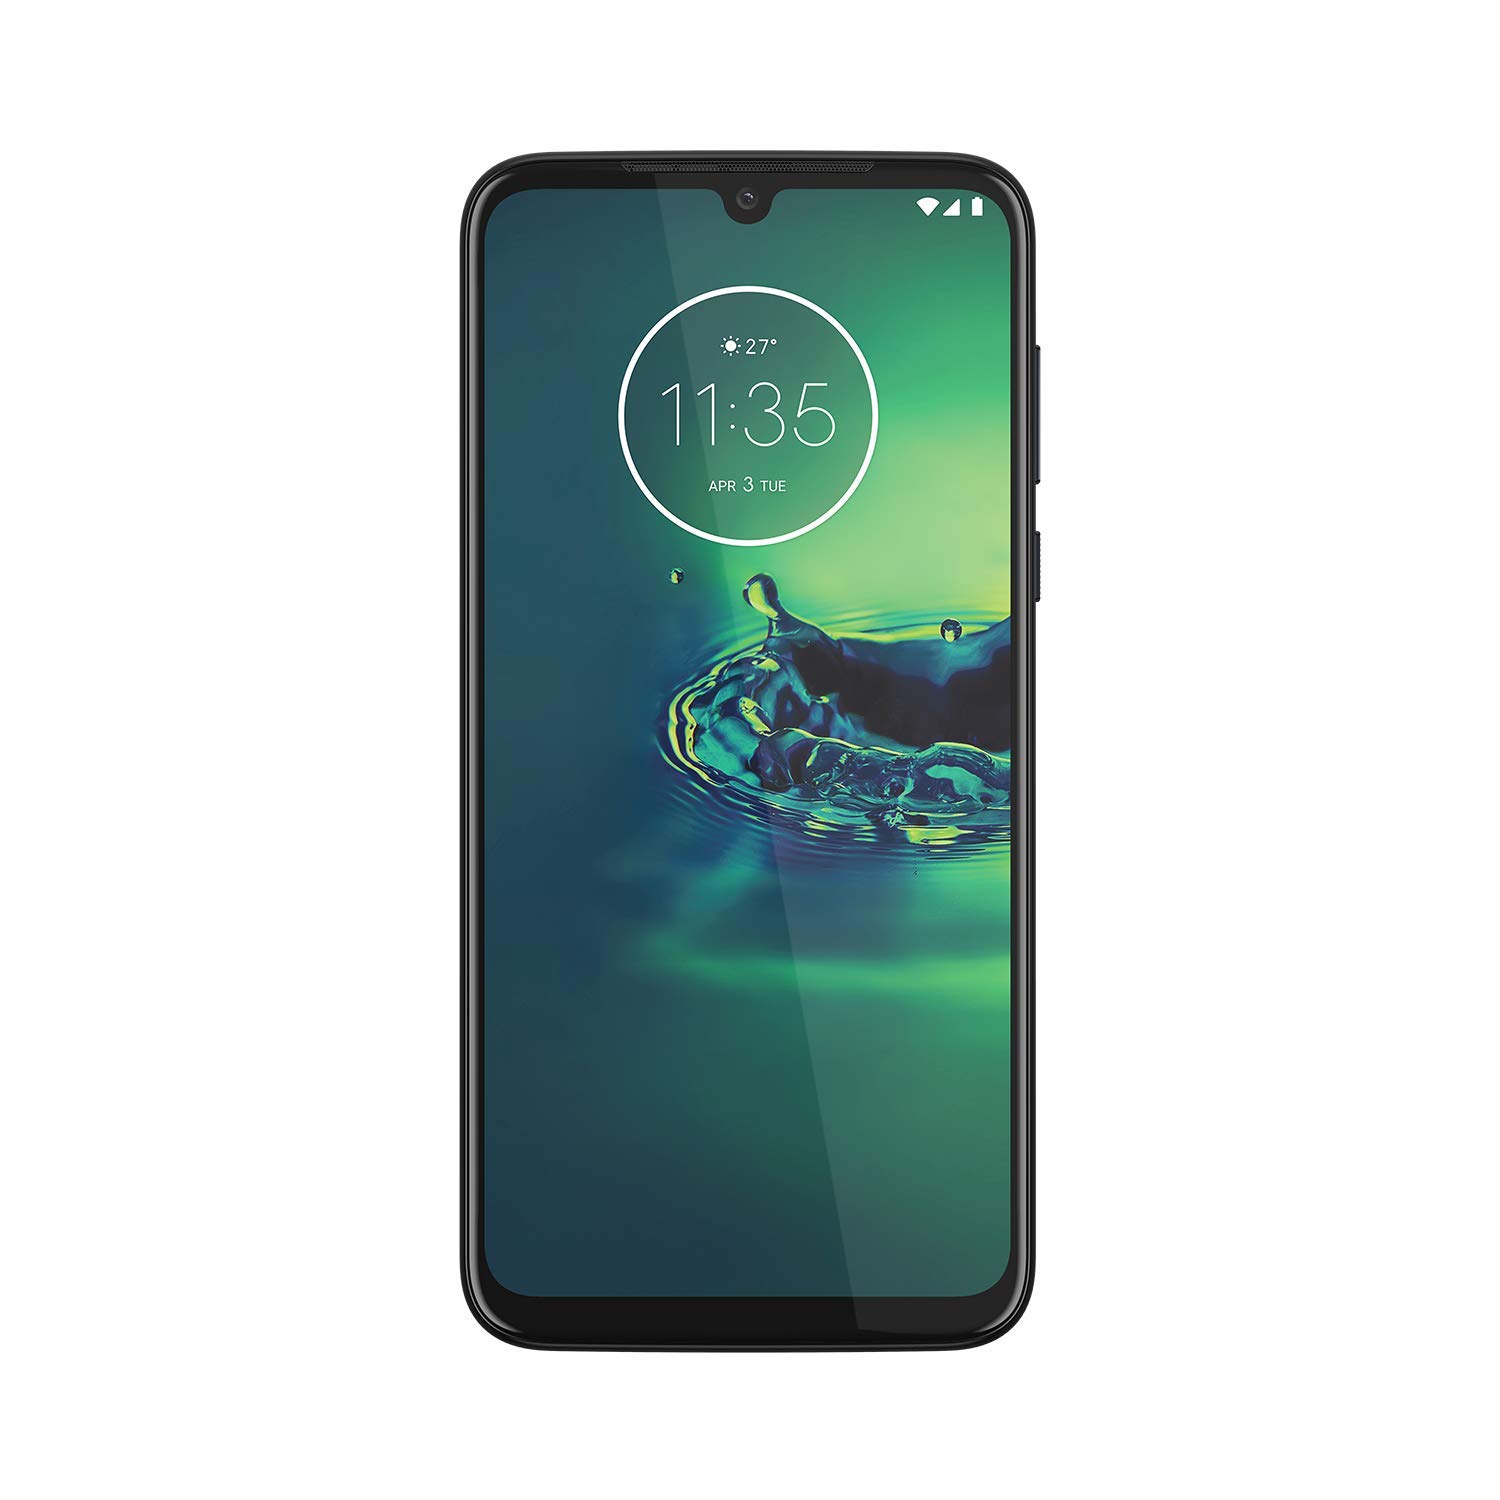 Moto G8+ plus | Unlocked | International GSM Only | 4/64GB | 25MP Camera | 2019 | Blue | NOT compatible with Sprint or Verizon